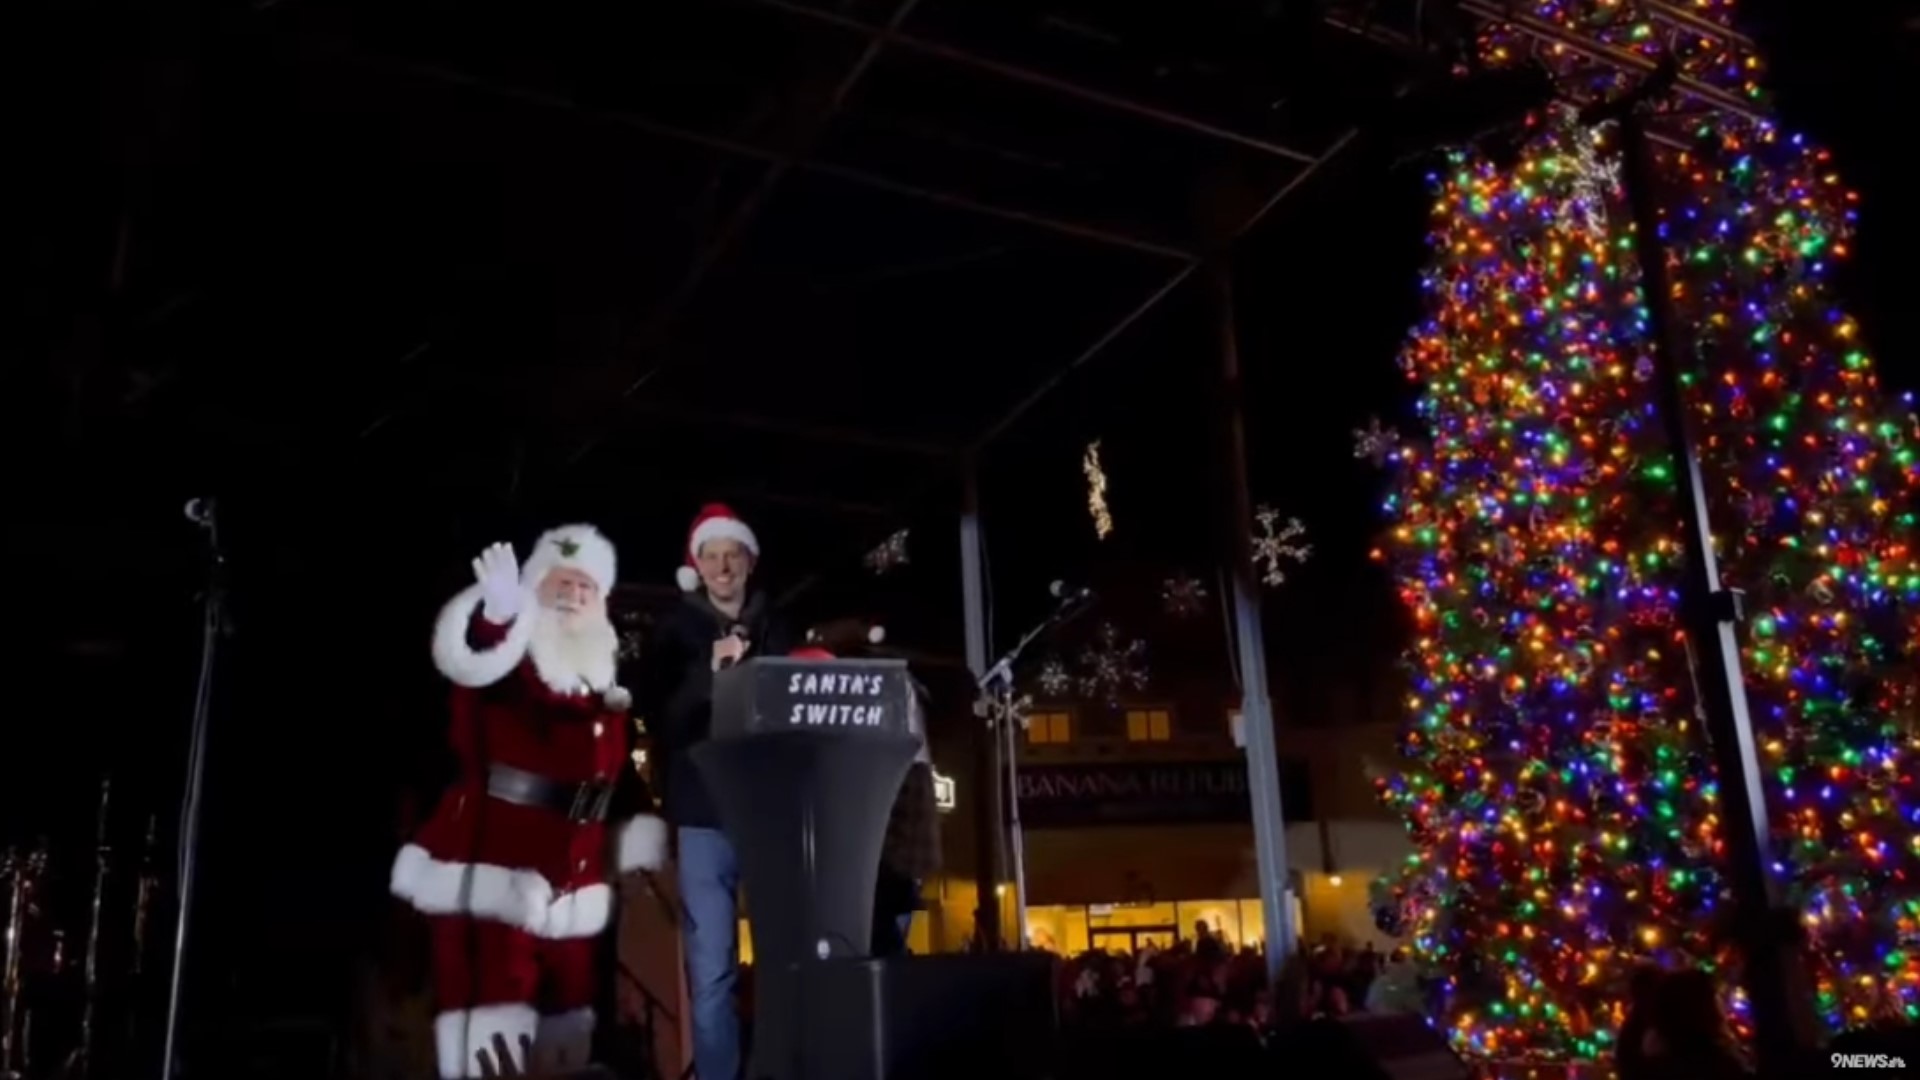 The annual Christmas Tree Lighting Concert and Ceremony was held at Outlets at Castle Rock.